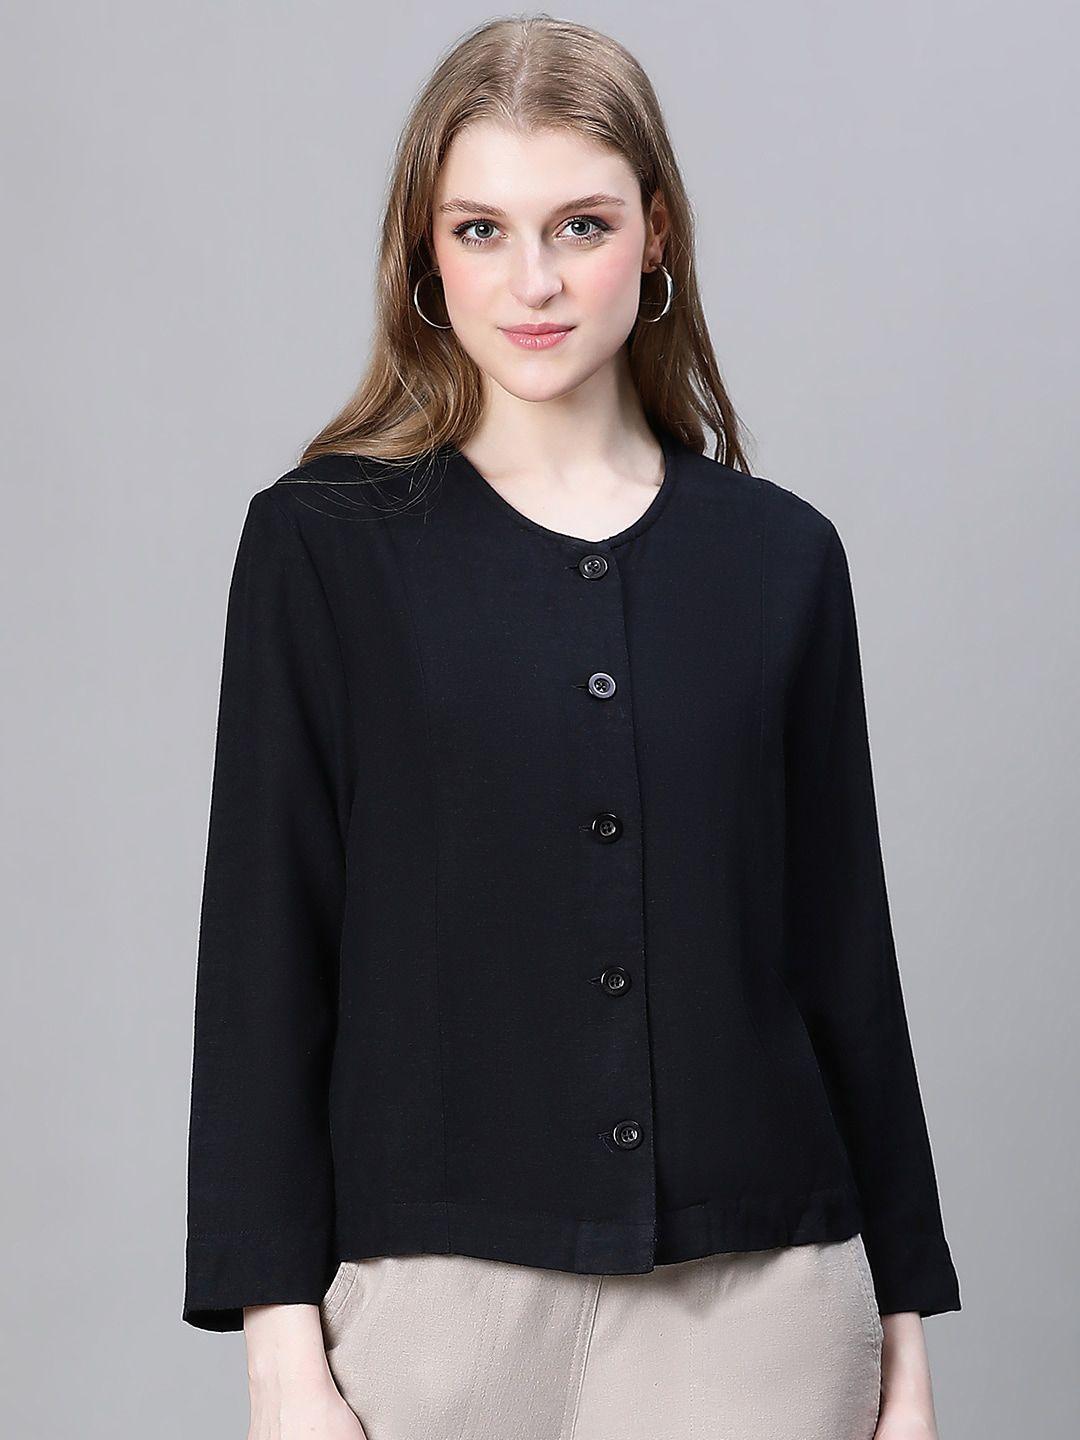 oxolloxo lightweight cotton casual tailored jacket